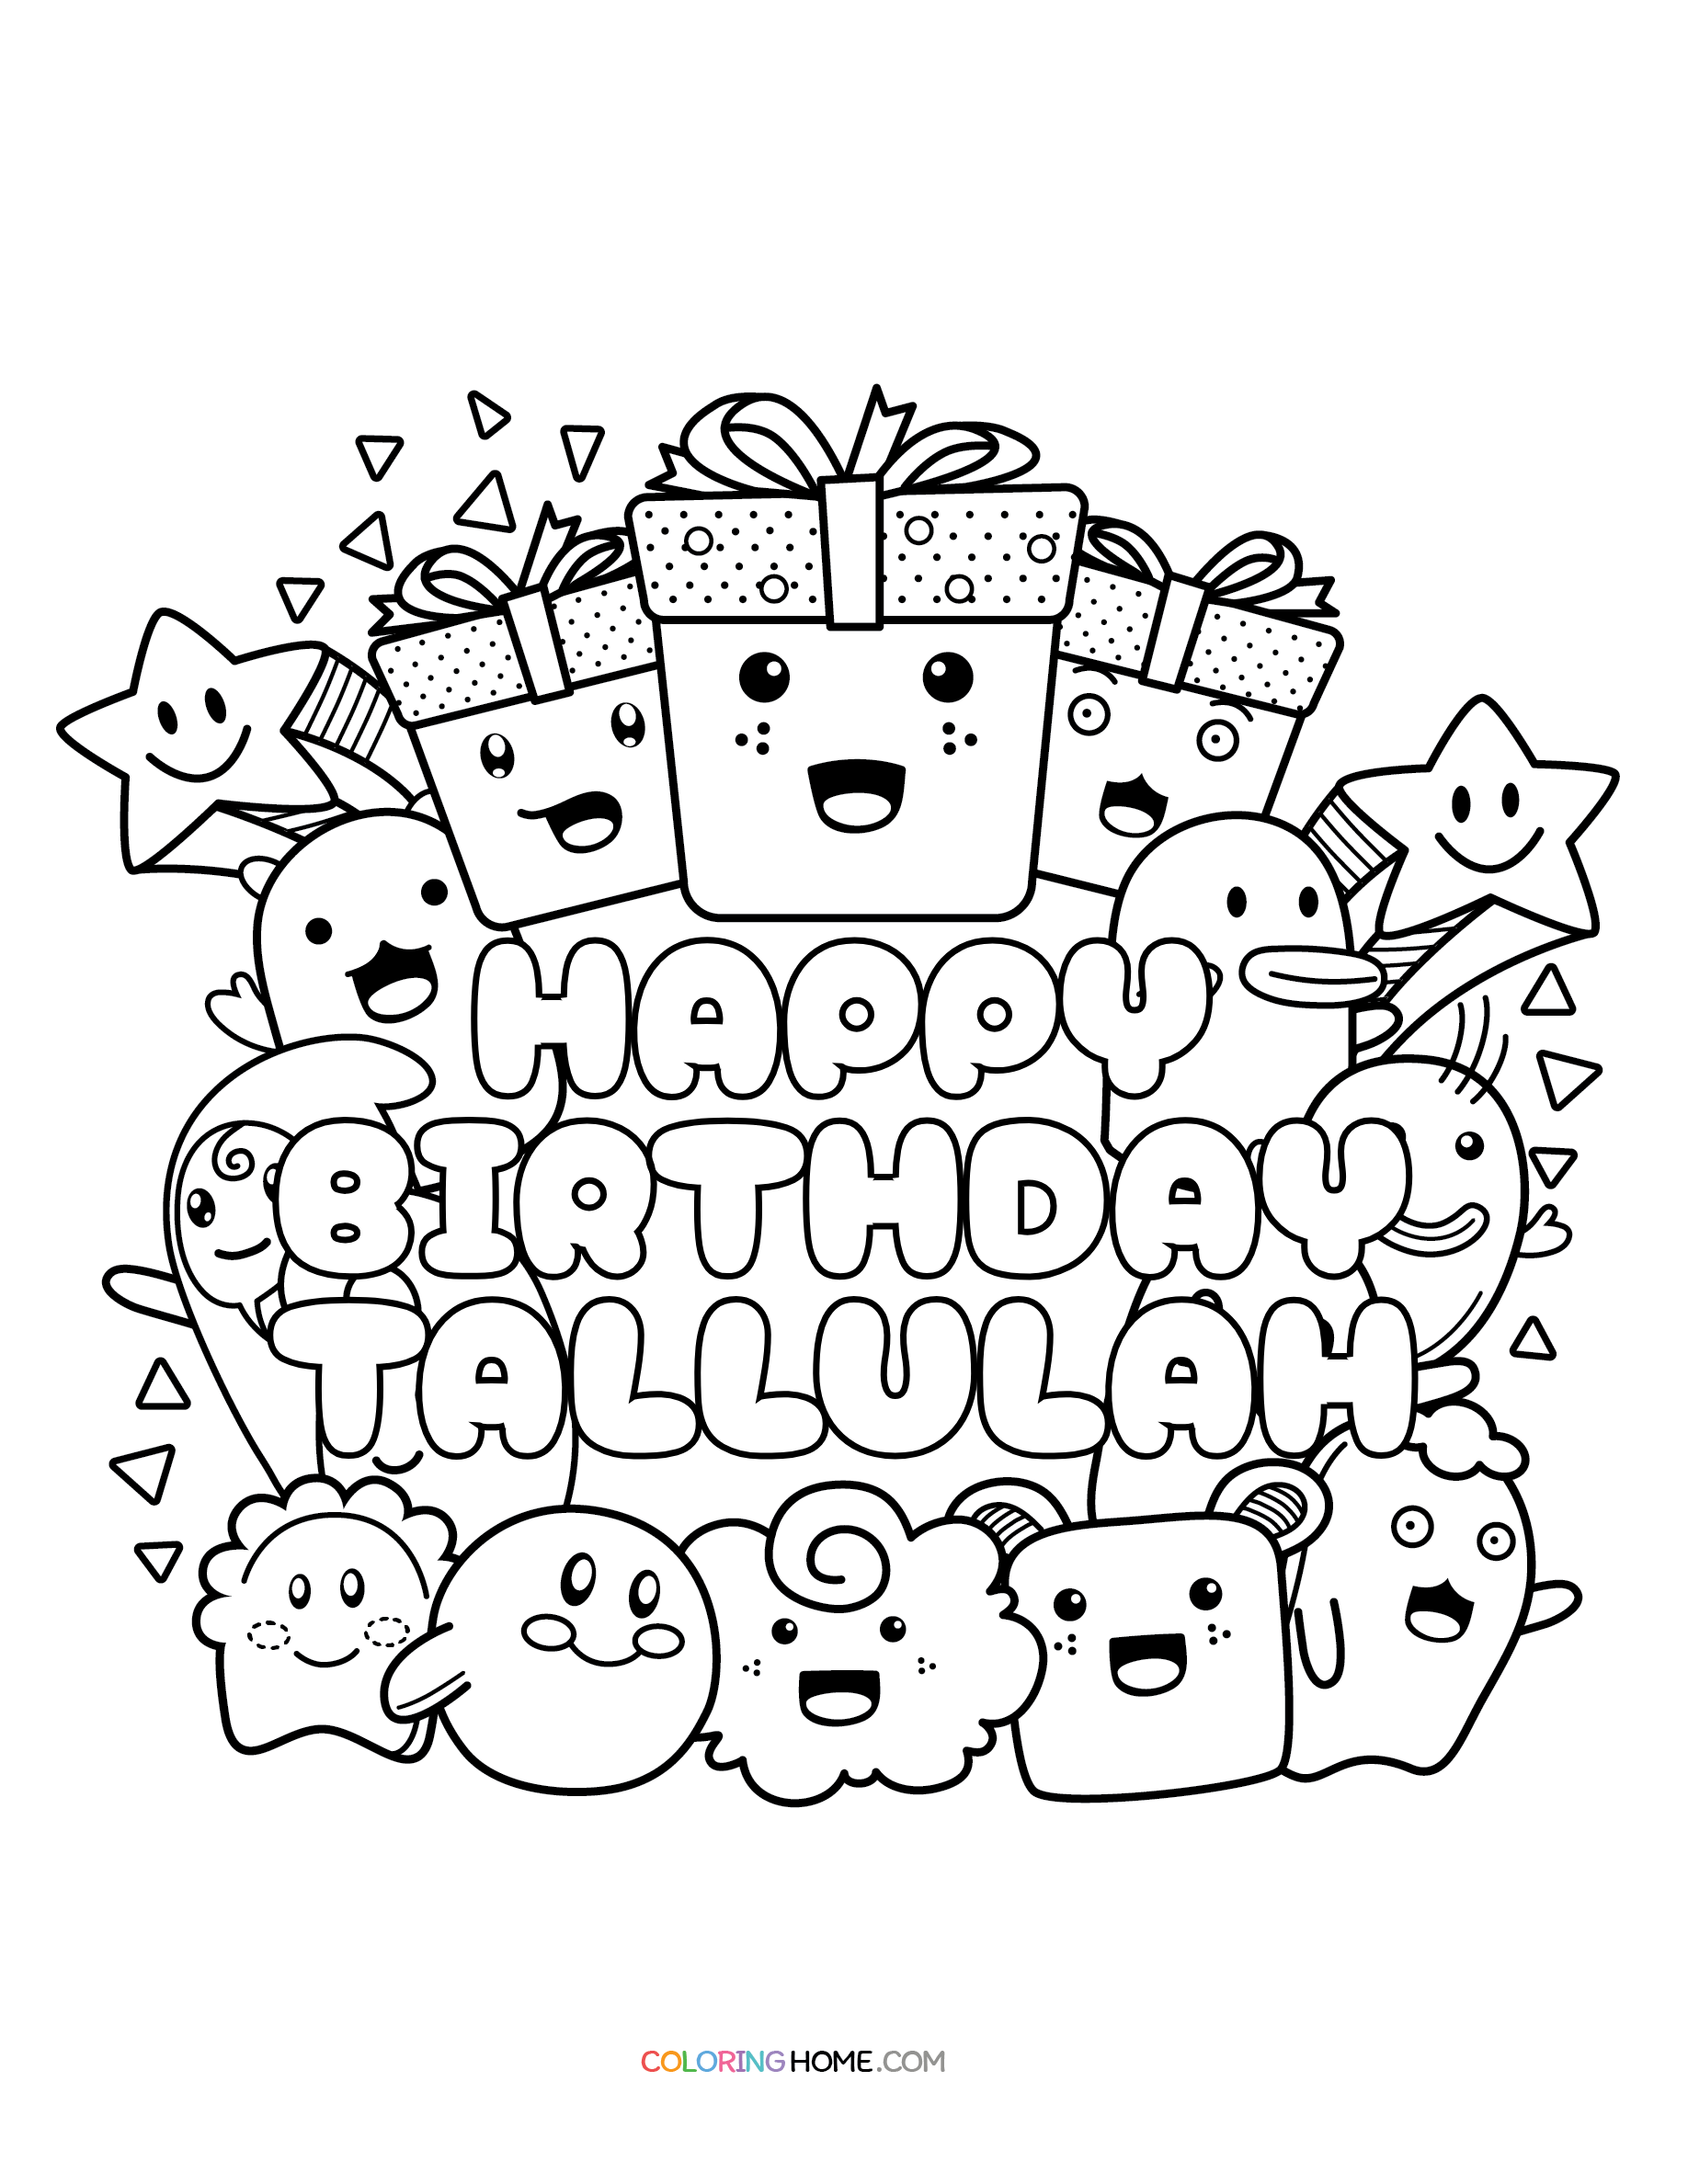 Tallulah Name Coloring Pages - Coloring Home